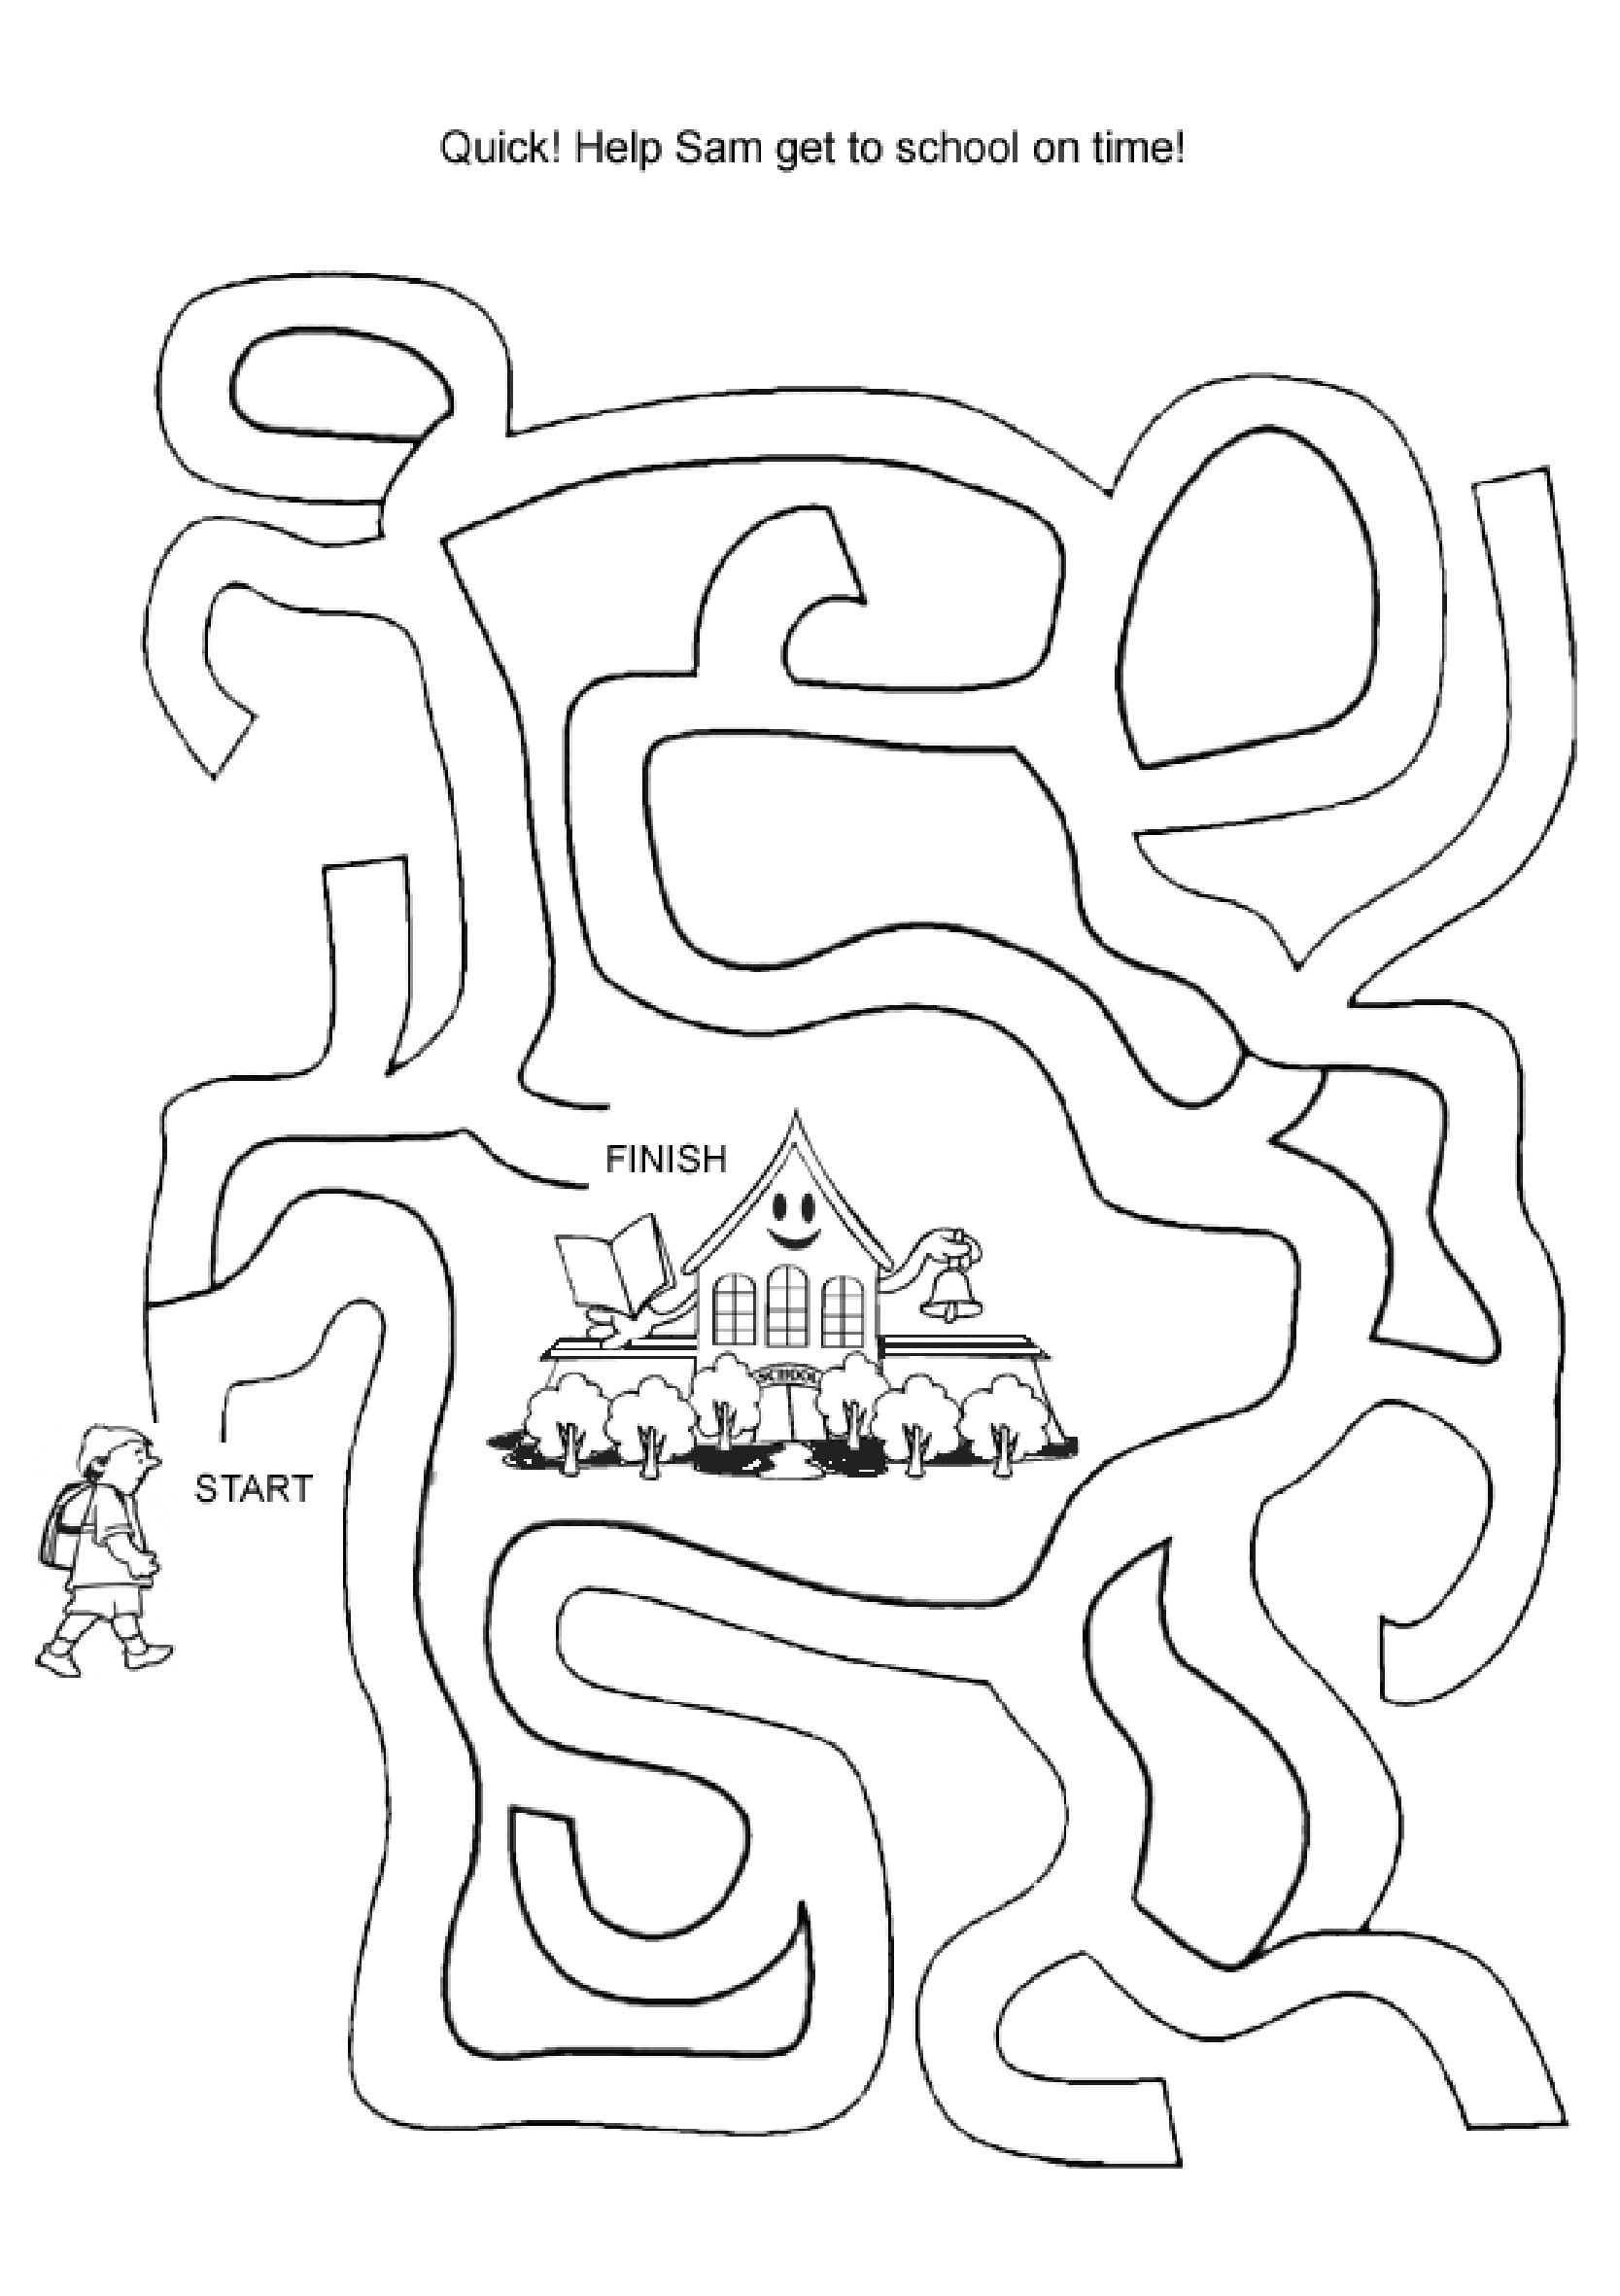 Download Easy Mazes. Printable Mazes for Kids. - Best Coloring Pages For Kids